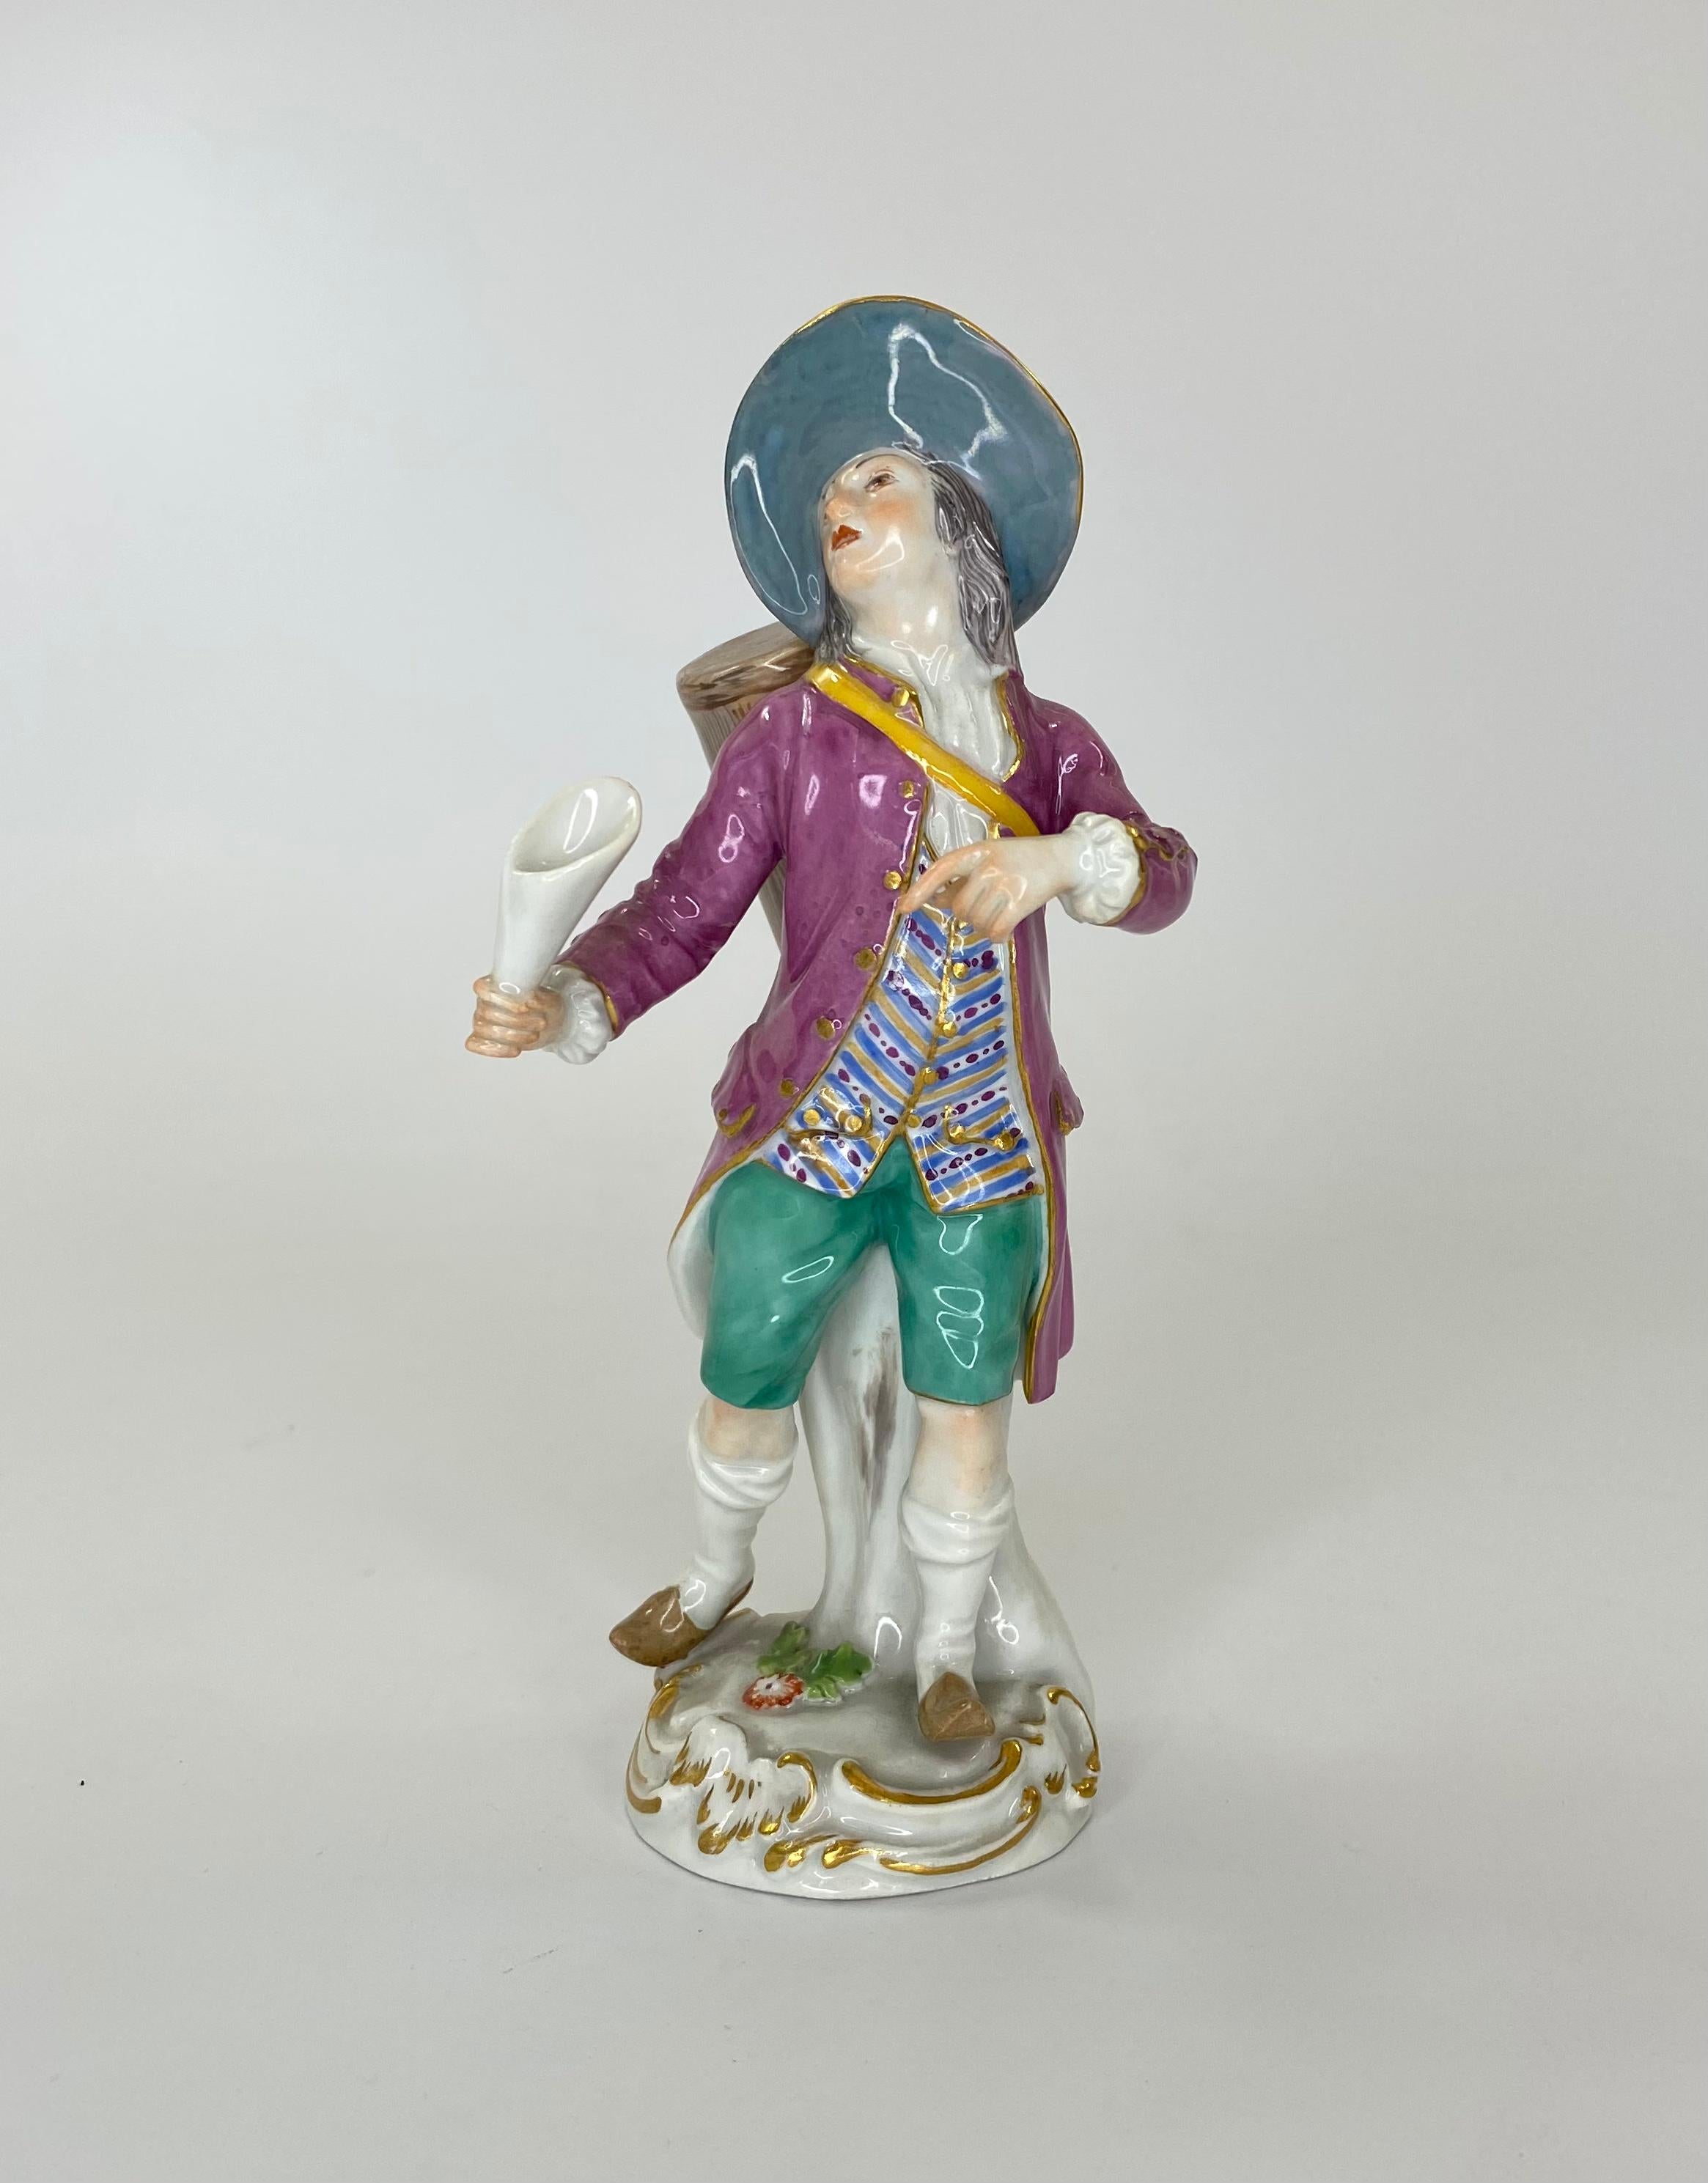 Meissen porcelain figure, ‘The Lottery Seller’, c. 1920. Originally modelled by Peter Reinicke, for the ‘Cris de Paris’ series, the figure depicts a man in 18th century costume, carrying a large drum on his back. Set upon a gilt rocaille